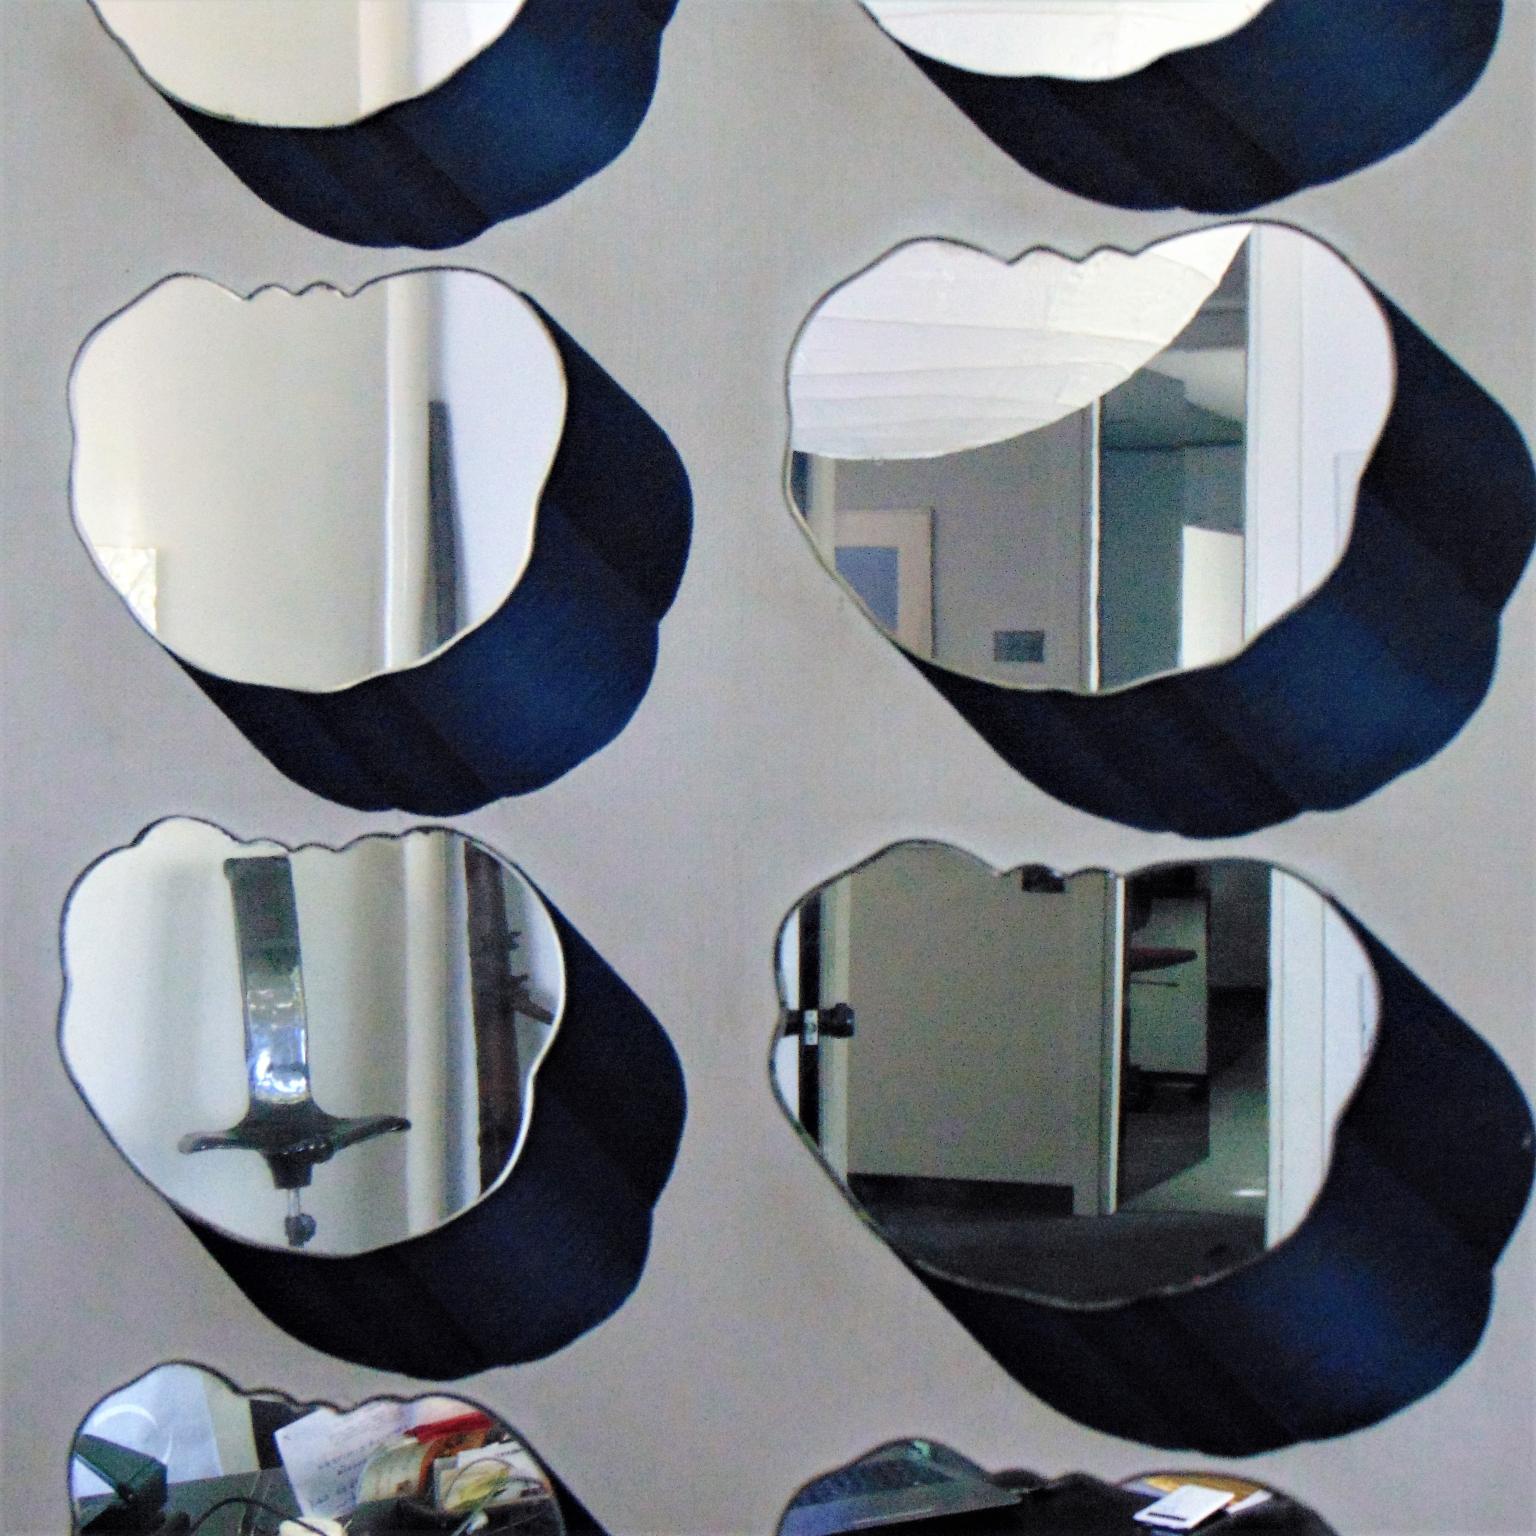 1968 Mirrored Pop Art Wall Sculpture, Concetto Pozzati, Acrylic on Canvas, Italy For Sale 1